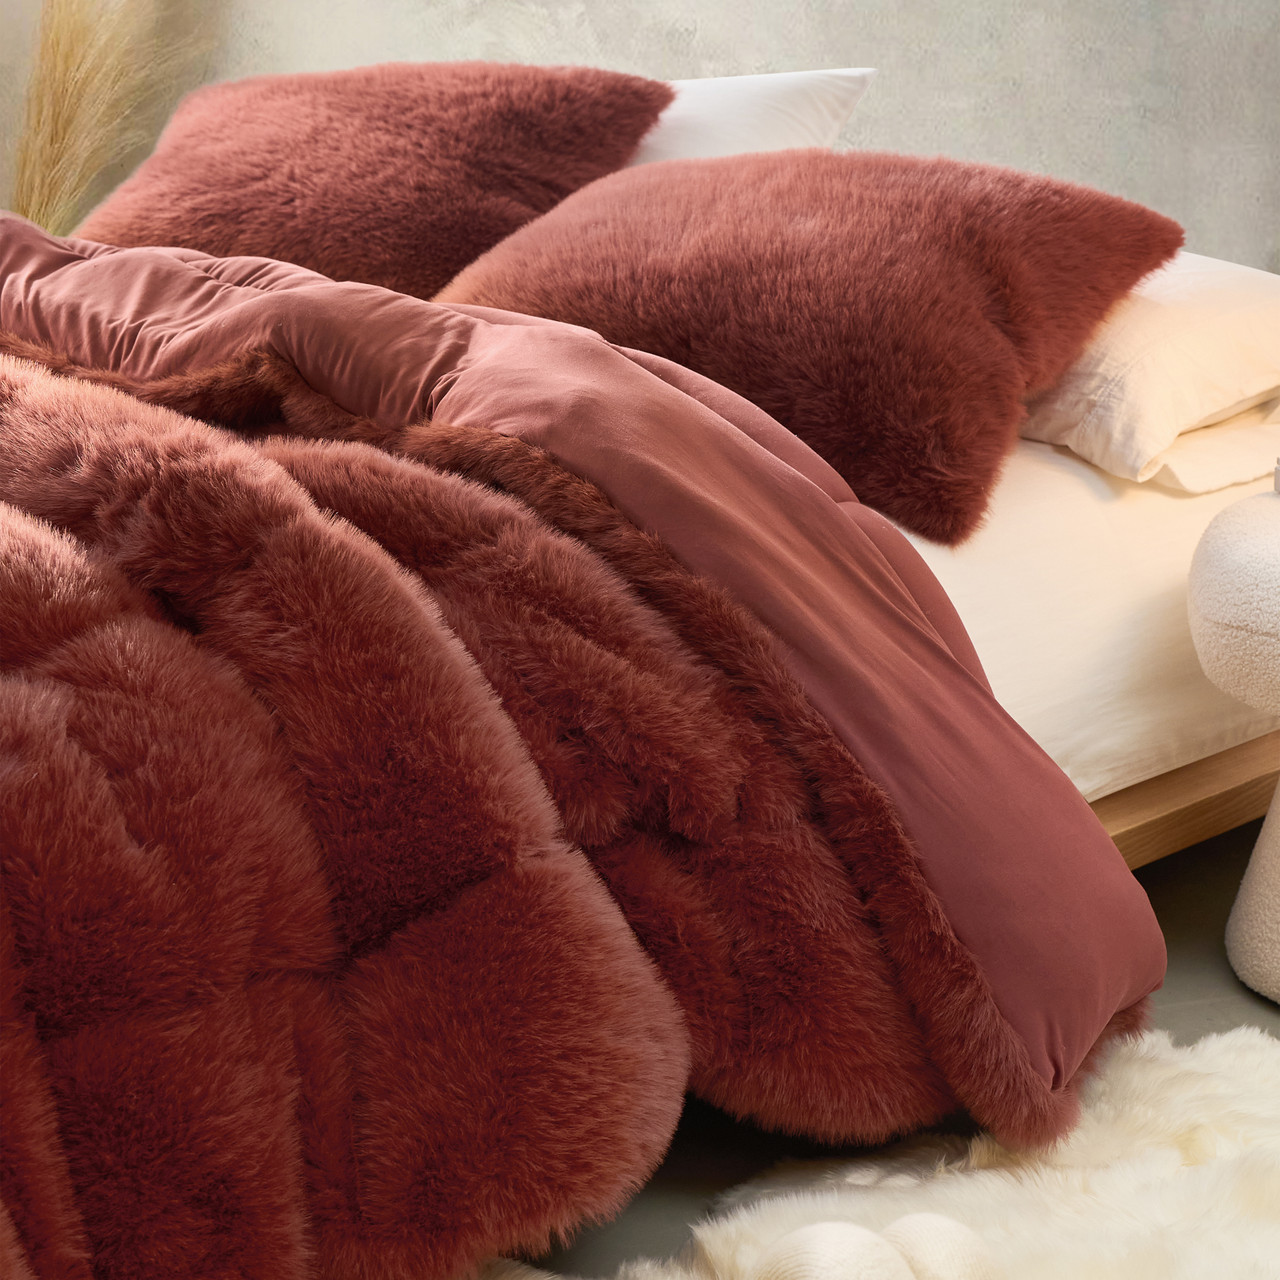 Winter Thick - Coma Inducer Oversized Queen Comforter - Burgundy Chocolate  Brown Bedding Set